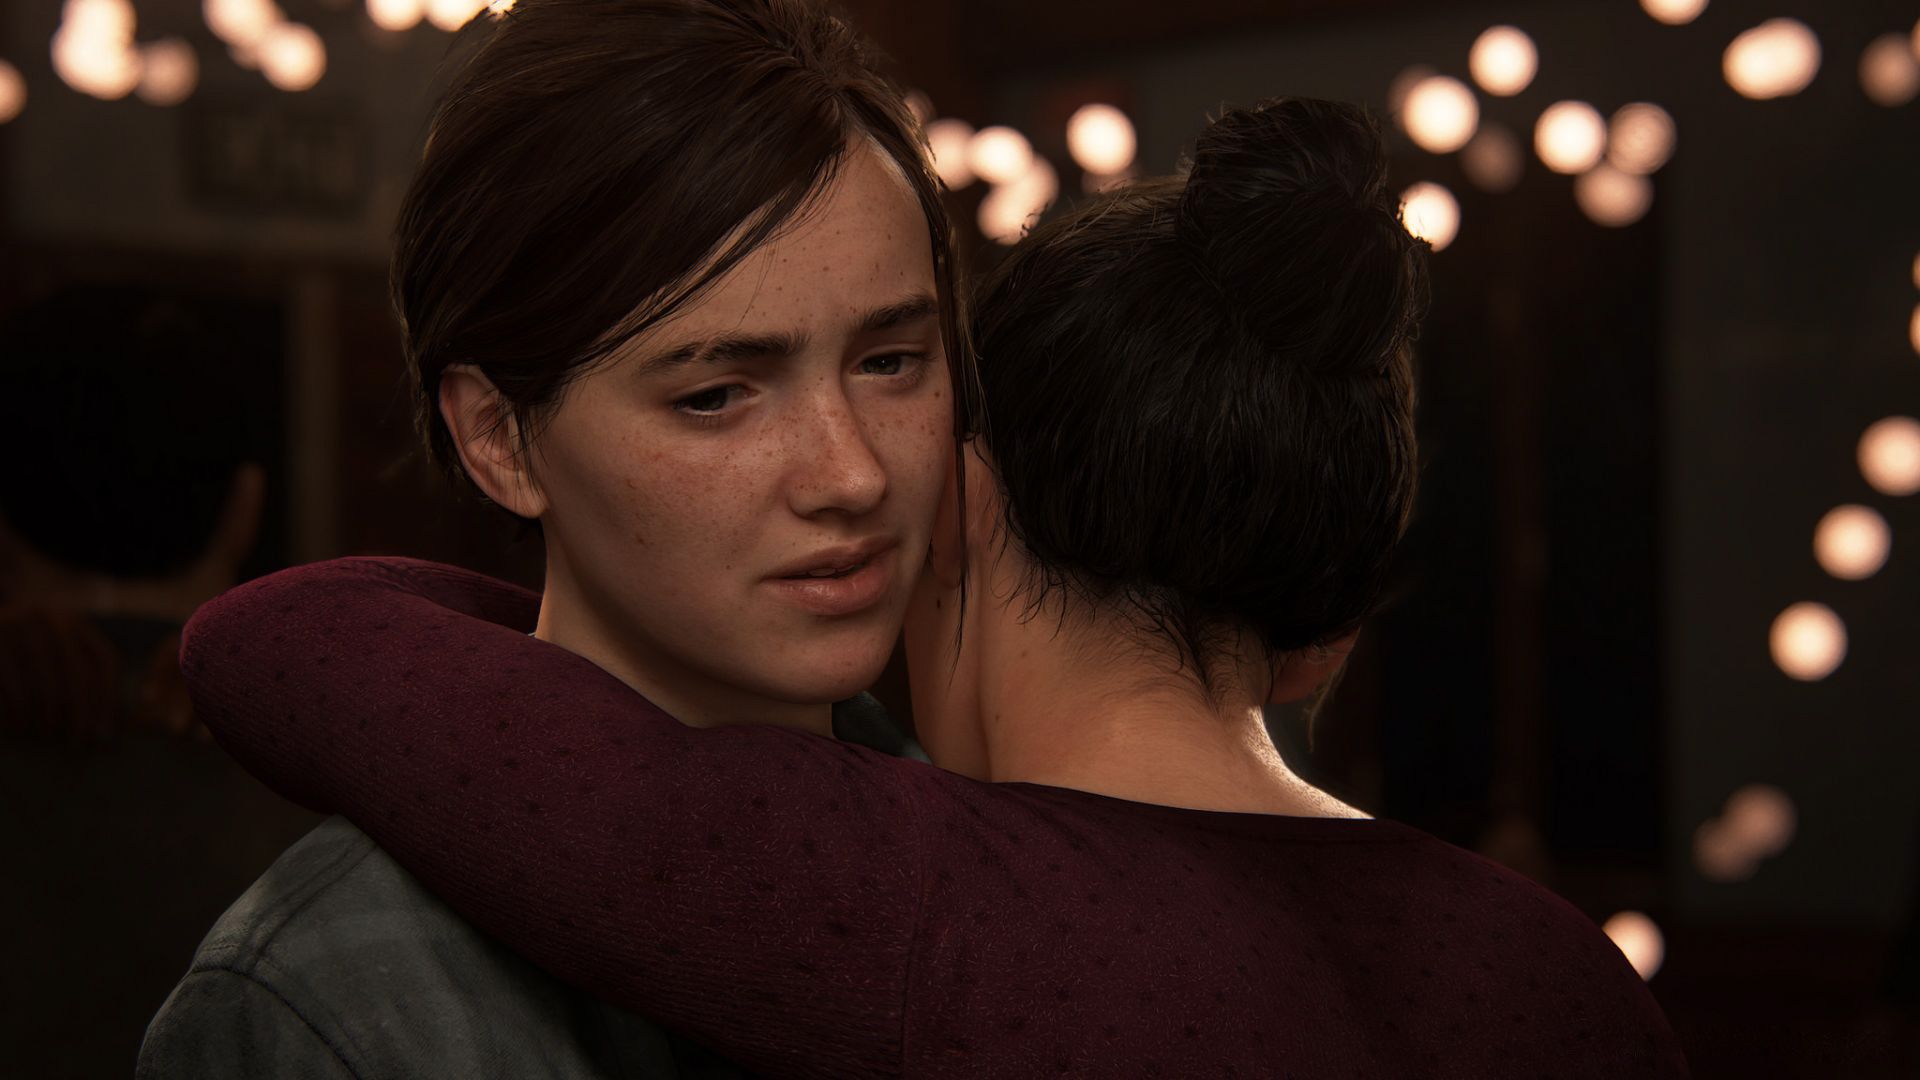 My Review of The Last of Us Part 2 (SPOILERS AHEAD)